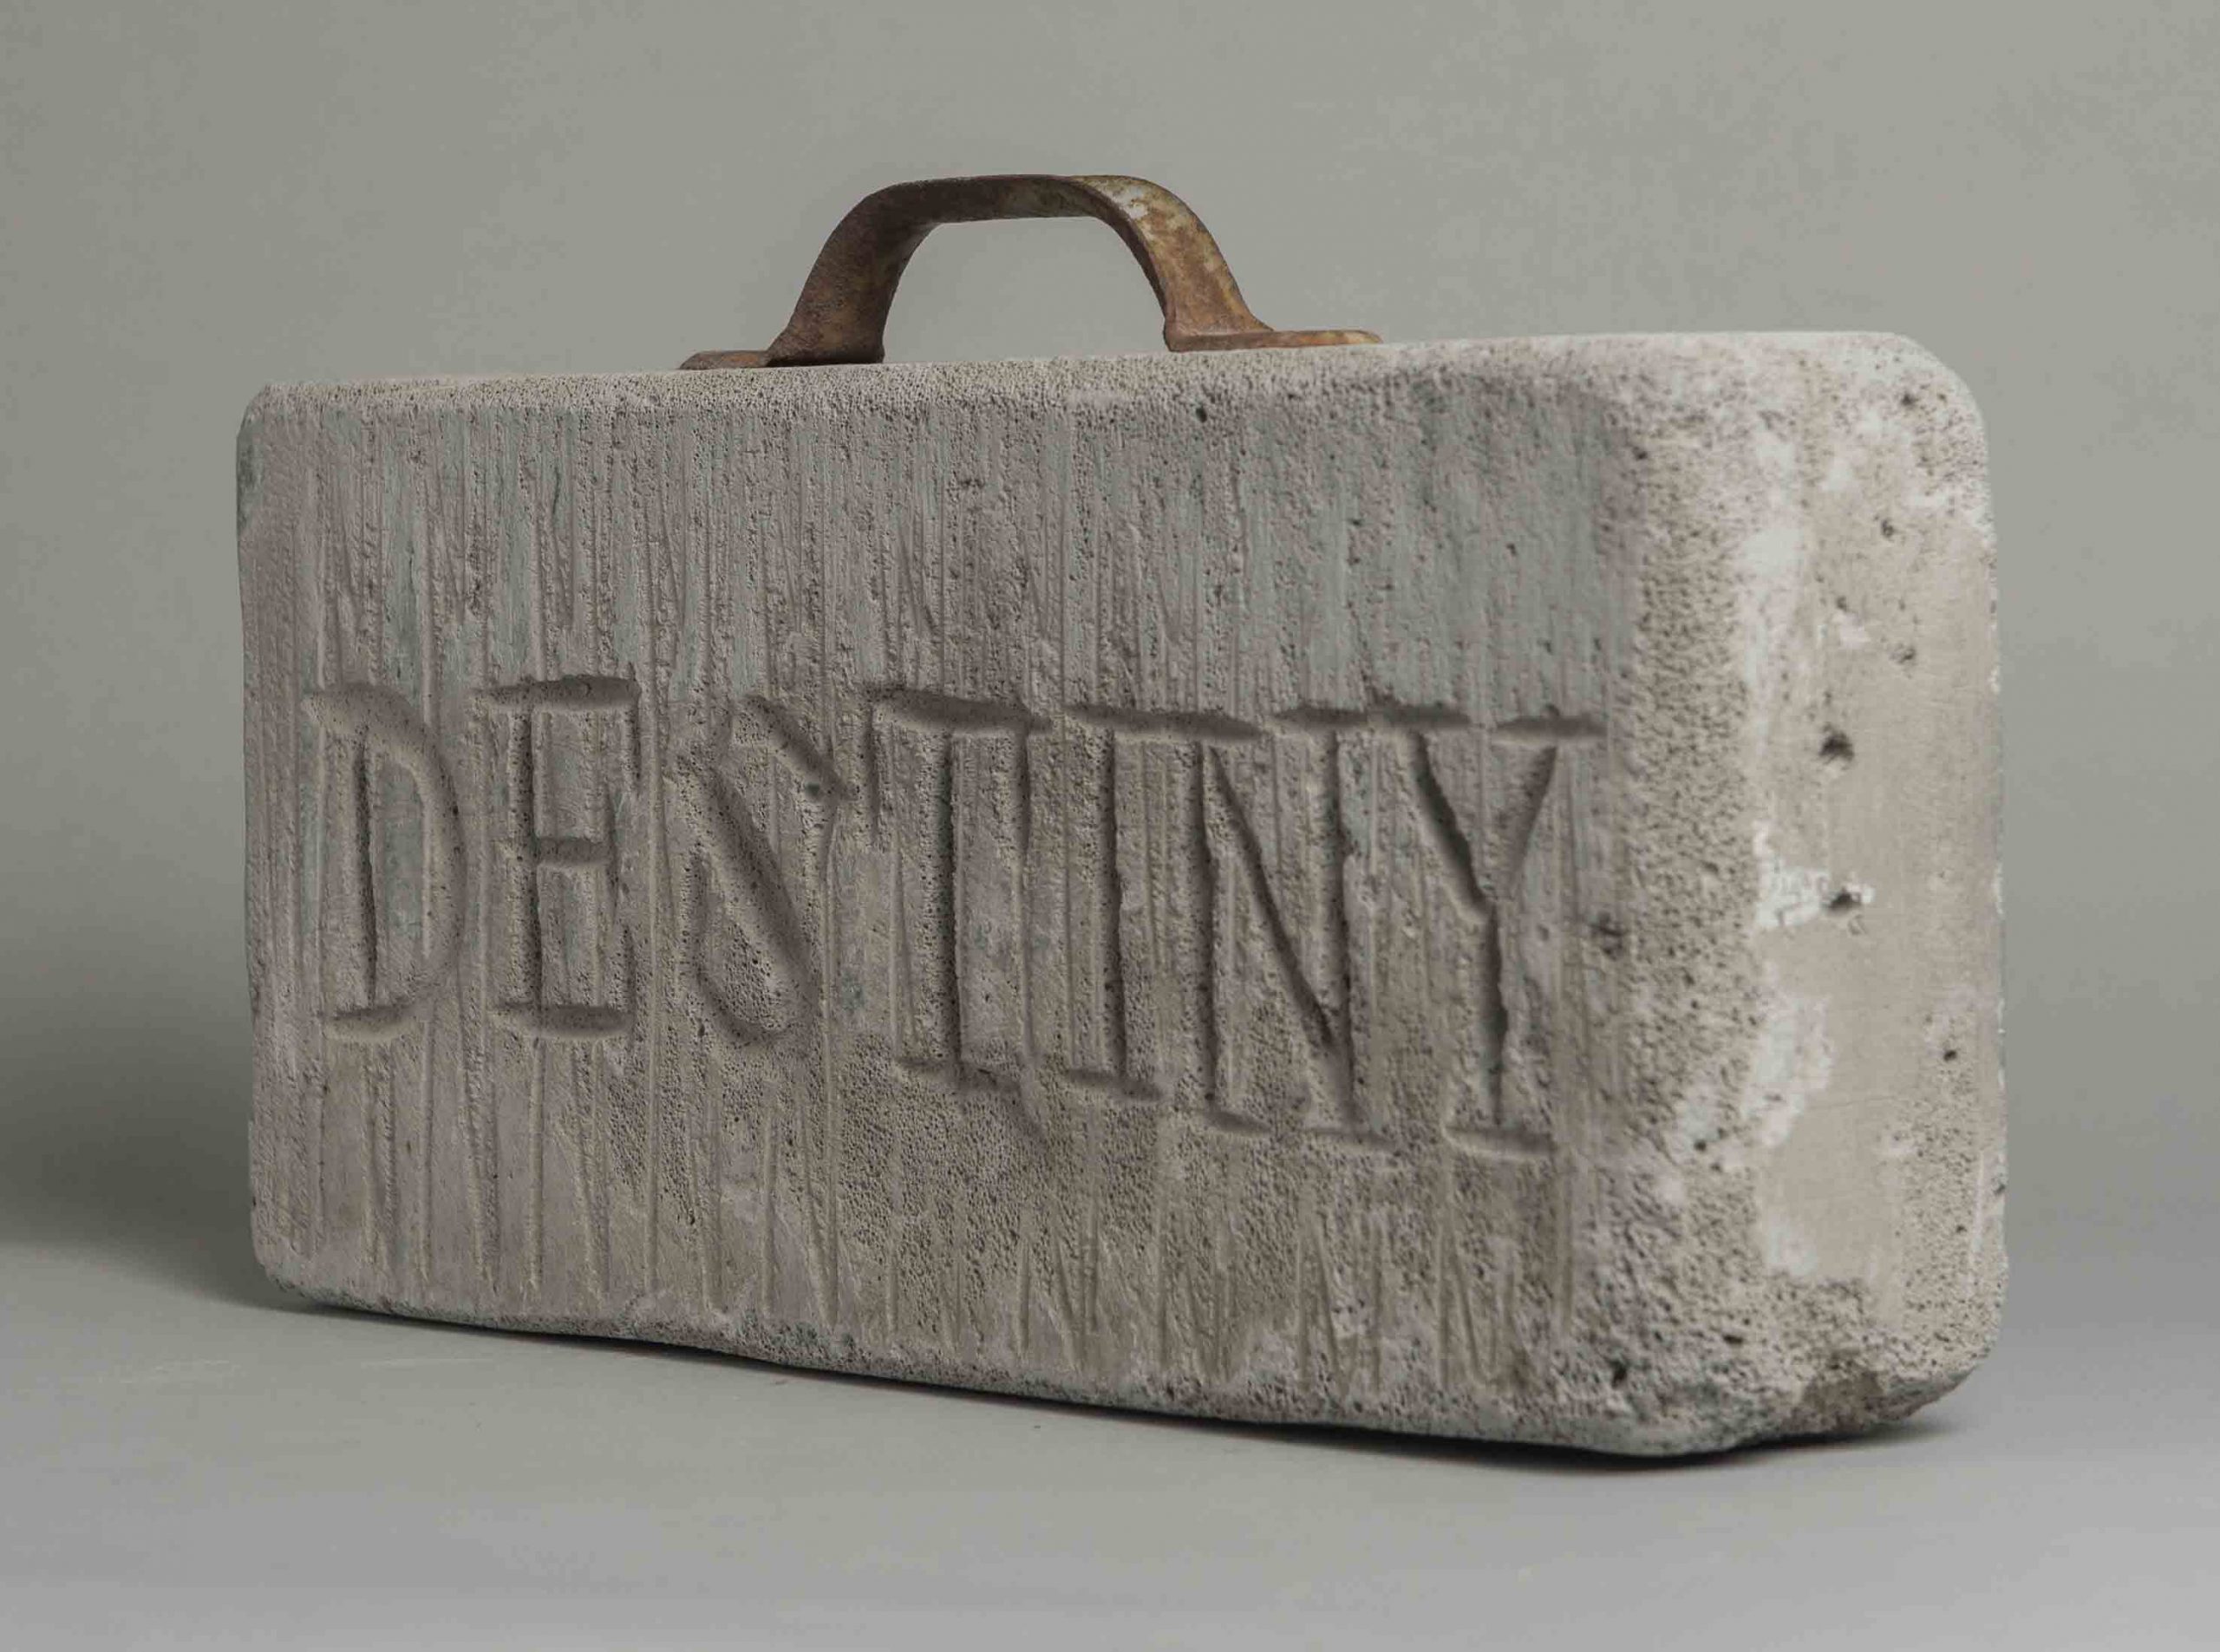 George Wyllie artwork referencing the Stone of Destiny. Copyright Smith Museum and Art Gallery, Stirling